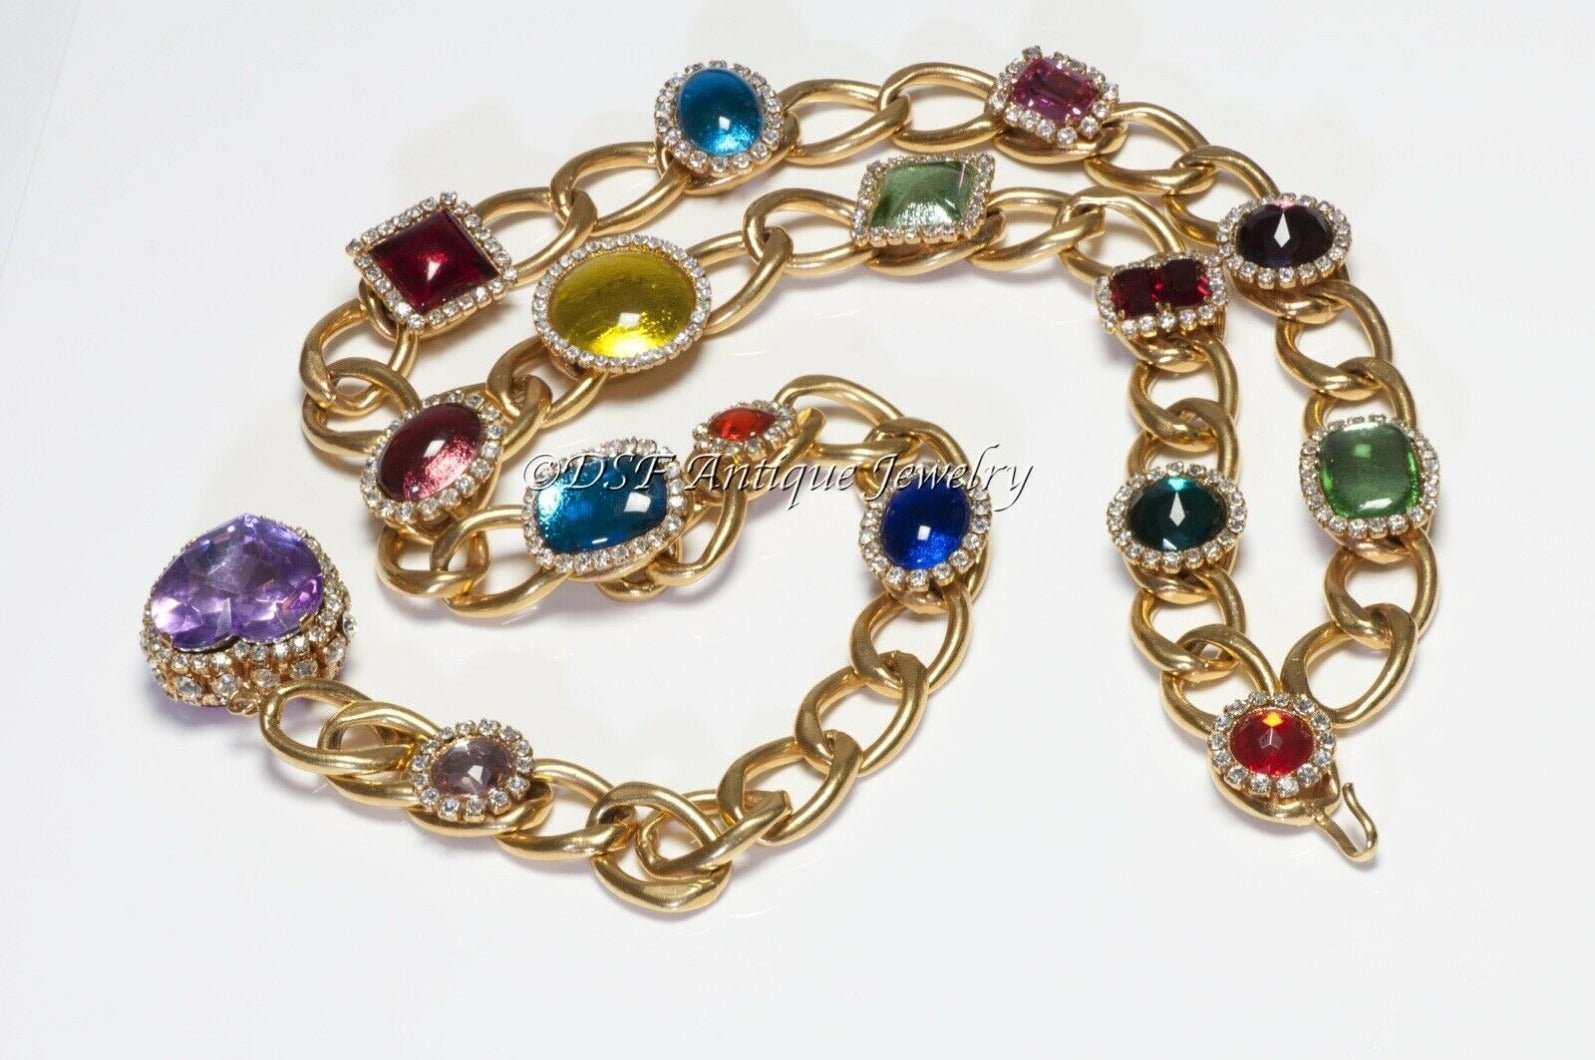 CHANEL Spring 1995 Multicolored Crystal Lucite Heart Chain Belt - DSF Antique Jewelry